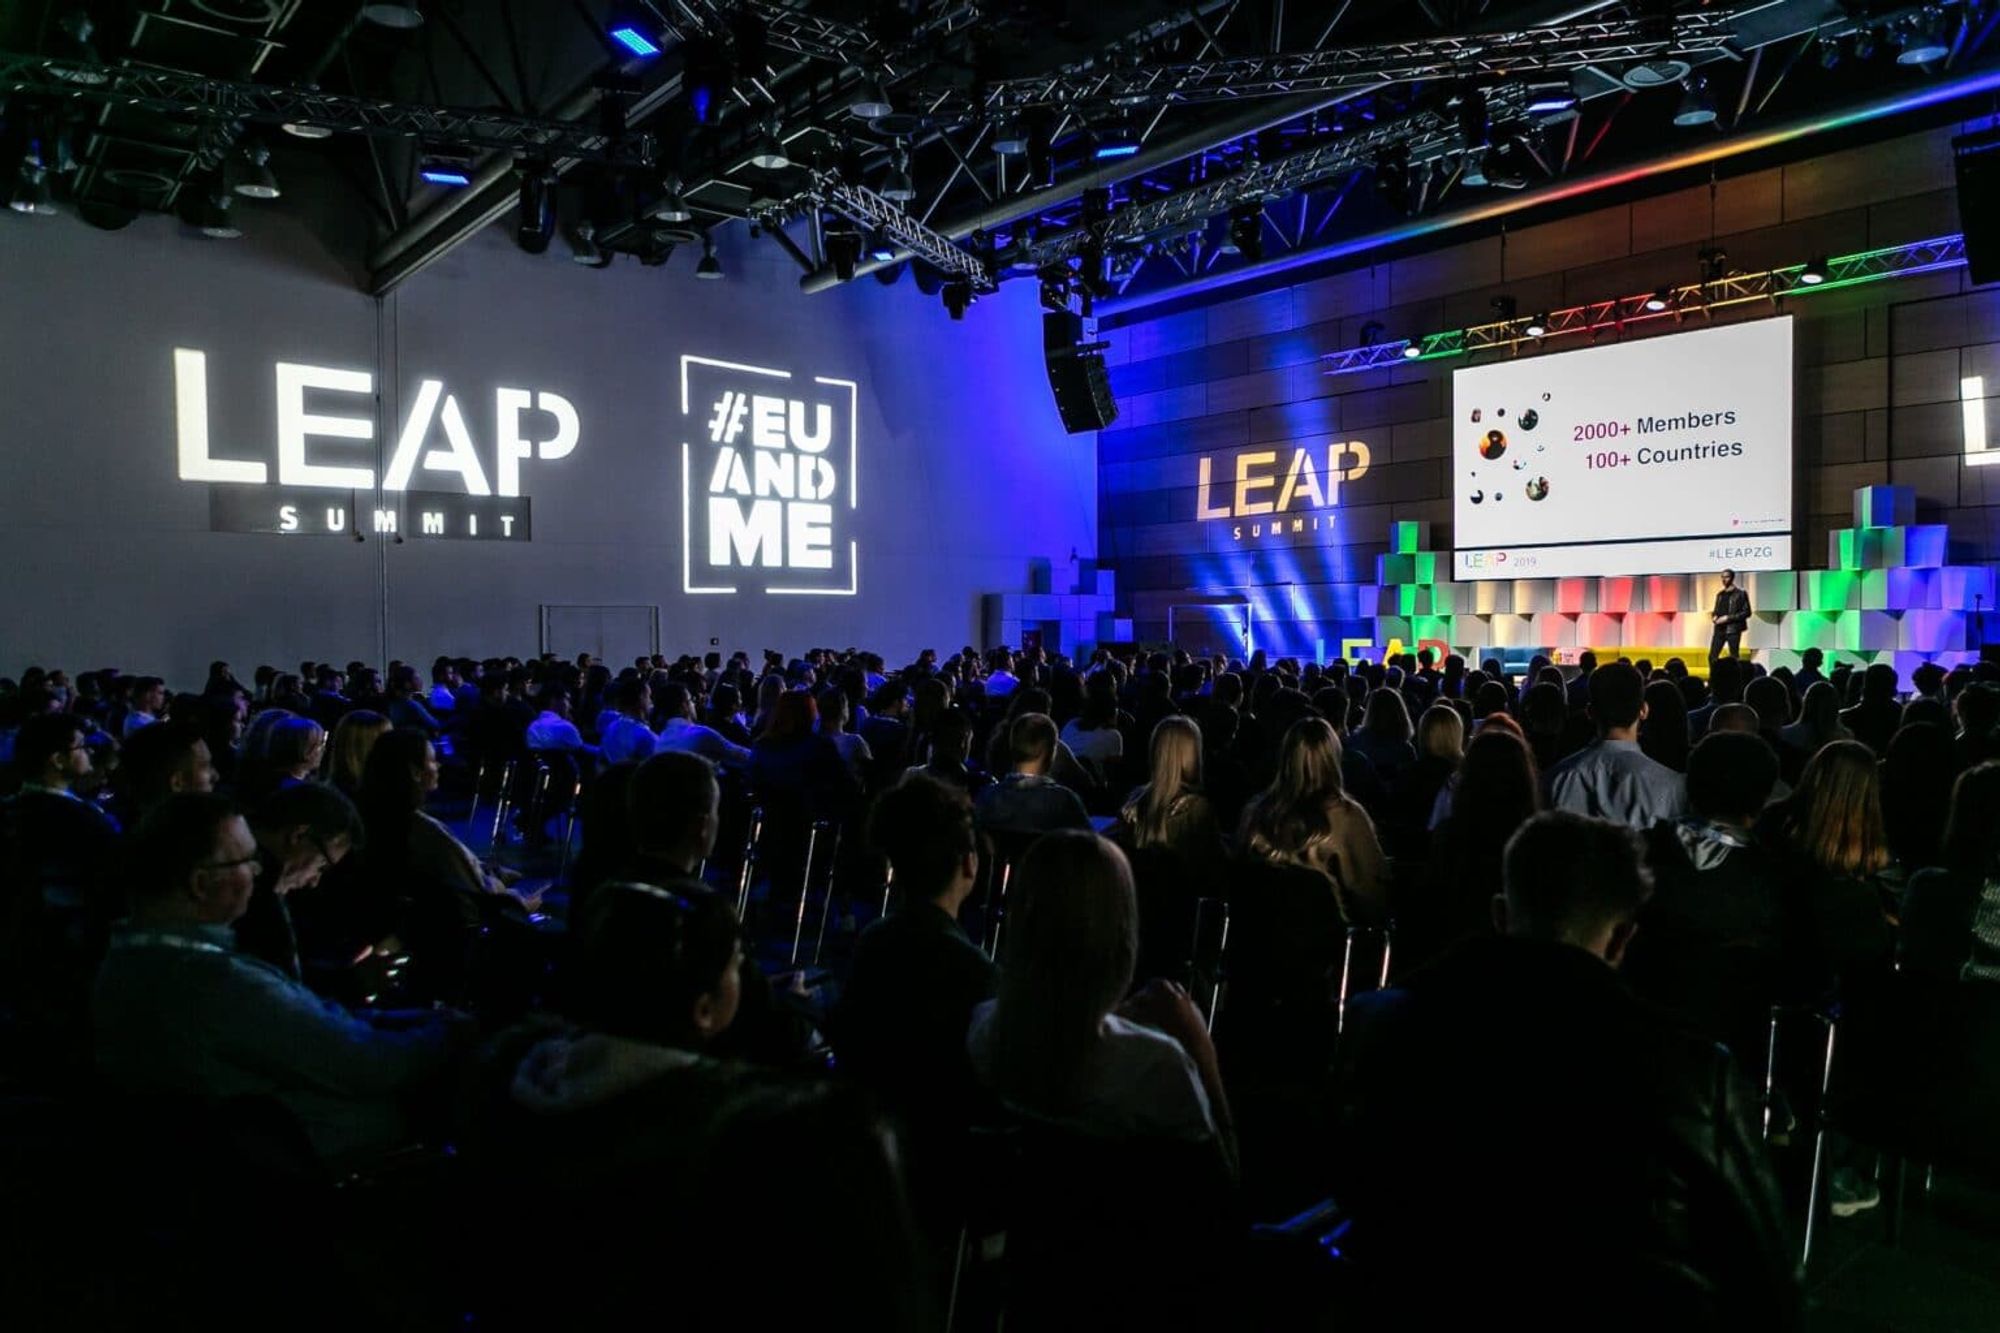 LEAP Summit Zagreb | Where Changemakers Leap Into Action